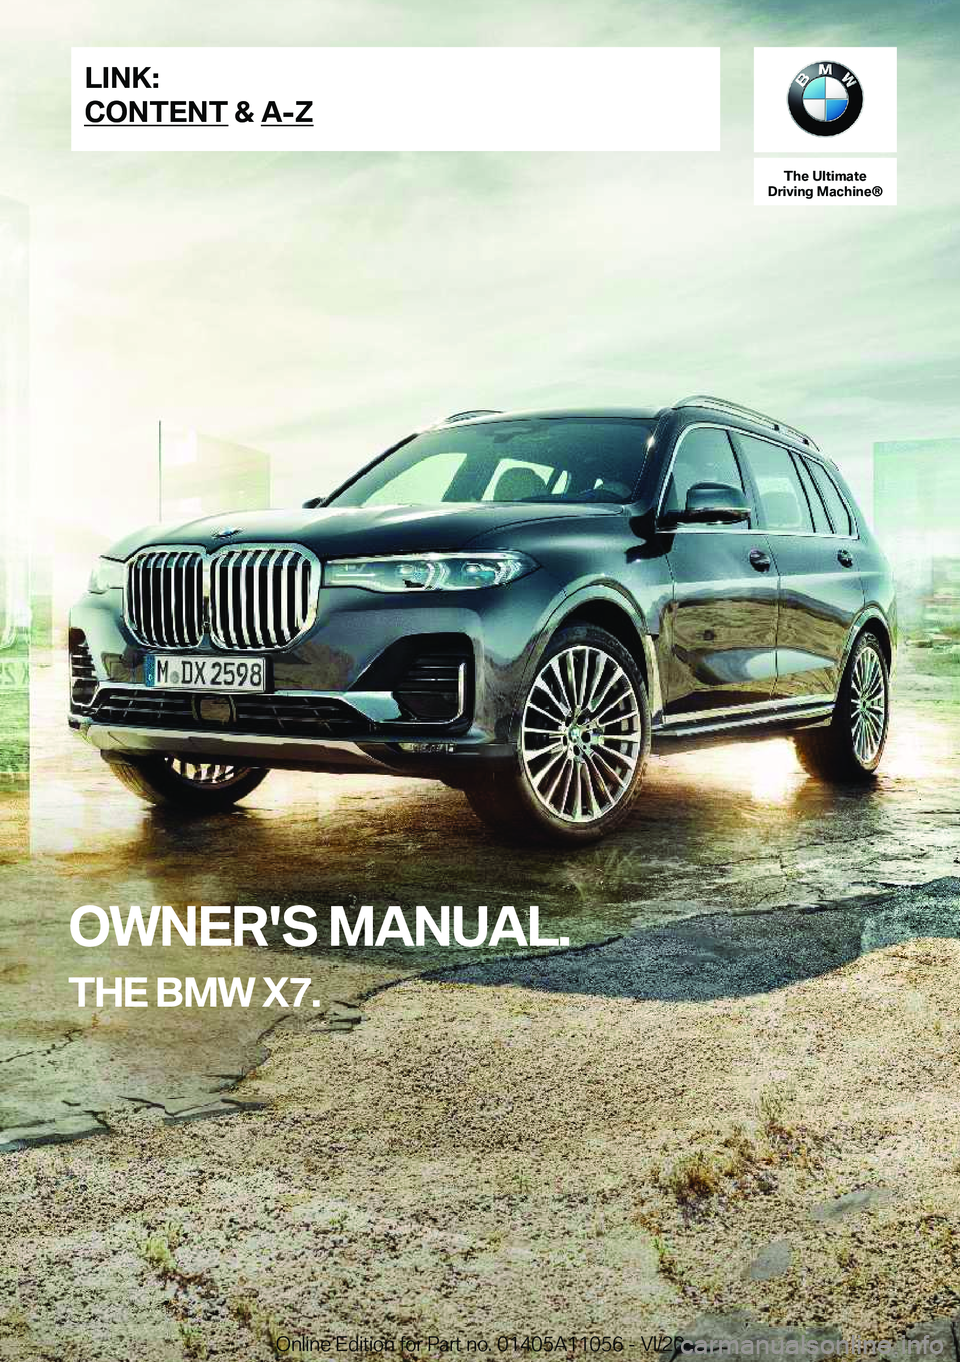 BMW X7 2021  Owners Manual �T�h�e��U�l�t�i�m�a�t�e
�D�r�i�v�i�n�g��M�a�c�h�i�n�e�n
�O�W�N�E�R�'�S��M�A�N�U�A�L�.
�T�H�E��B�M�W��X�7�.�L�I�N�K�:
�C�O�N�T�E�N�T��&��A�-�Z�O�n�l�i�n�e��E�d�i�t�i�o�n��f�o�r��P�a�r�t�